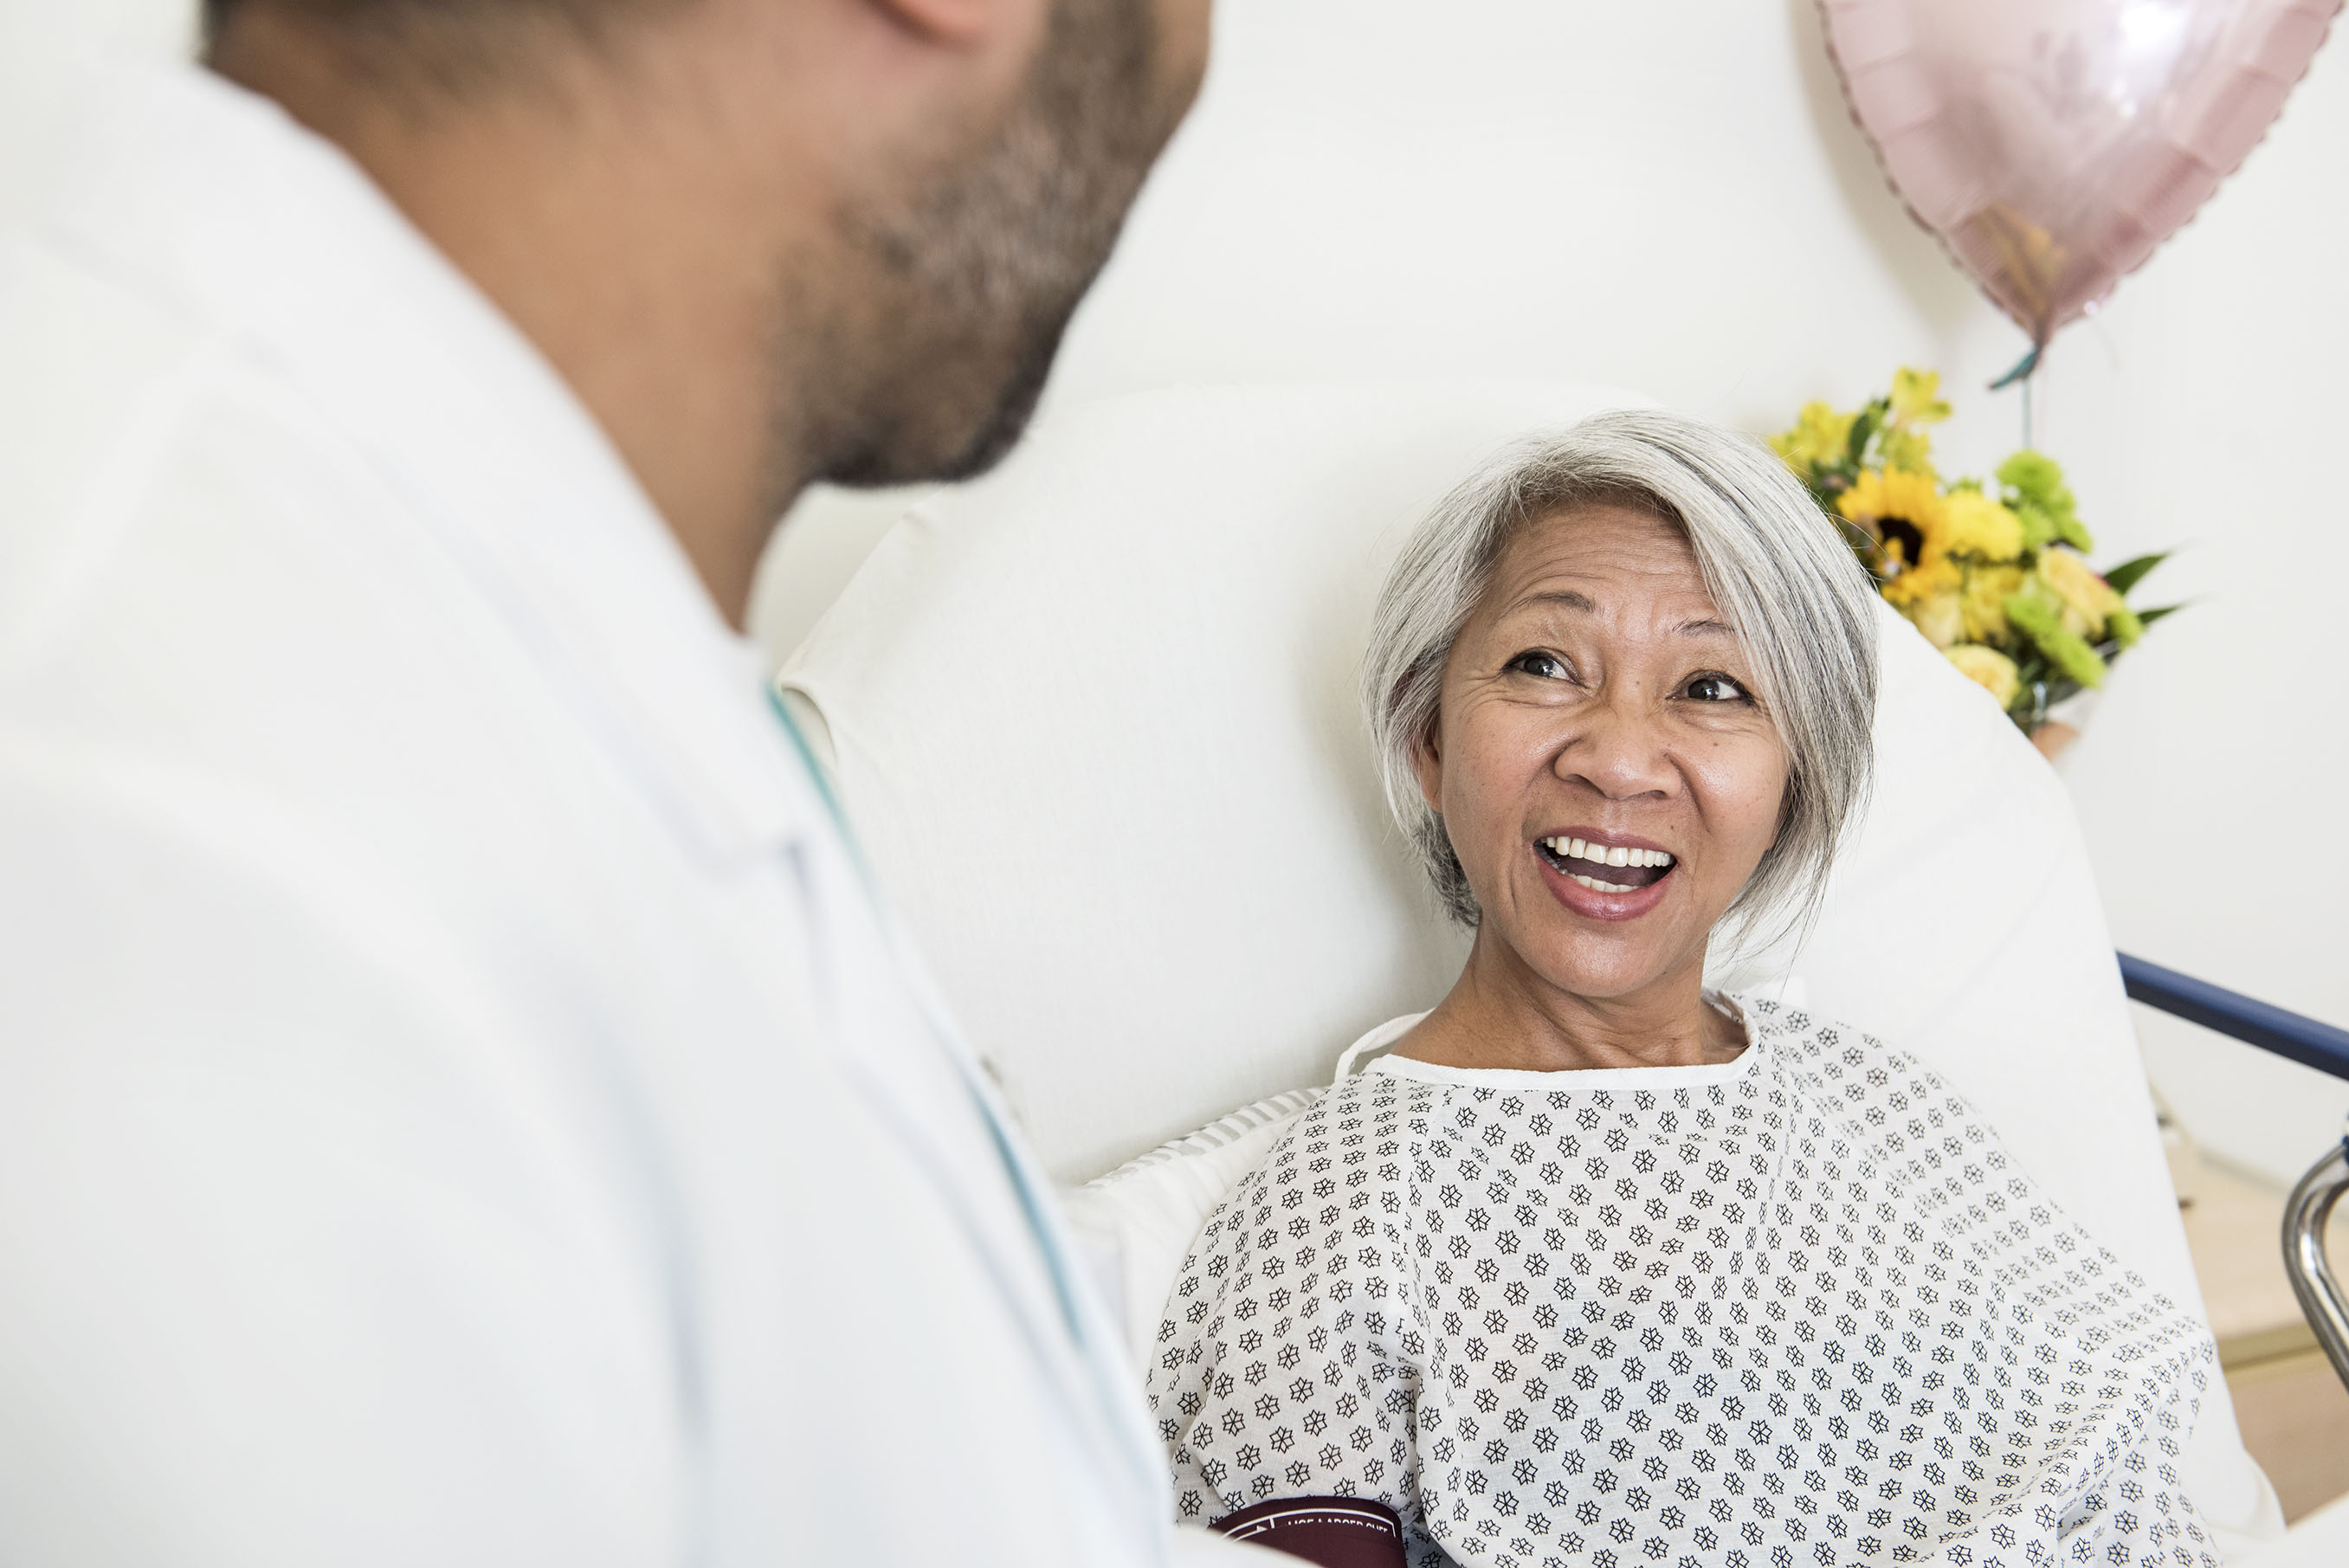 Patient smiling at doctor image